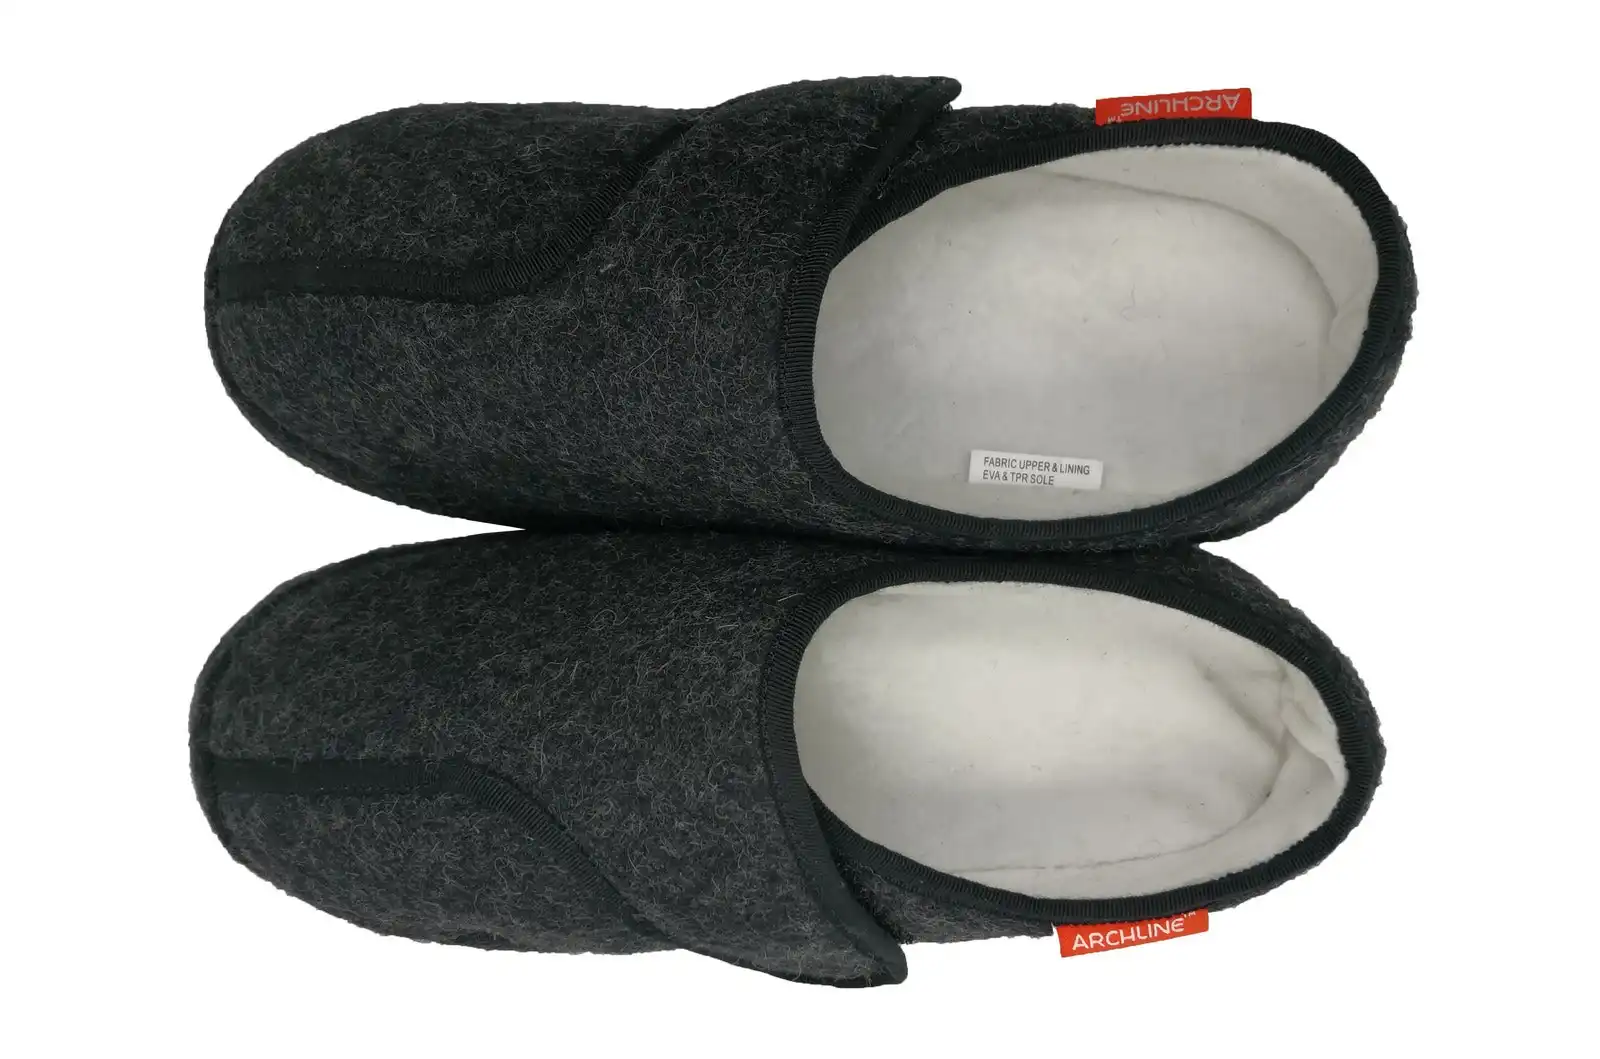 Archline Orthotic Plus Slippers Closed Scuffs Medical Pain Relief Moccasins